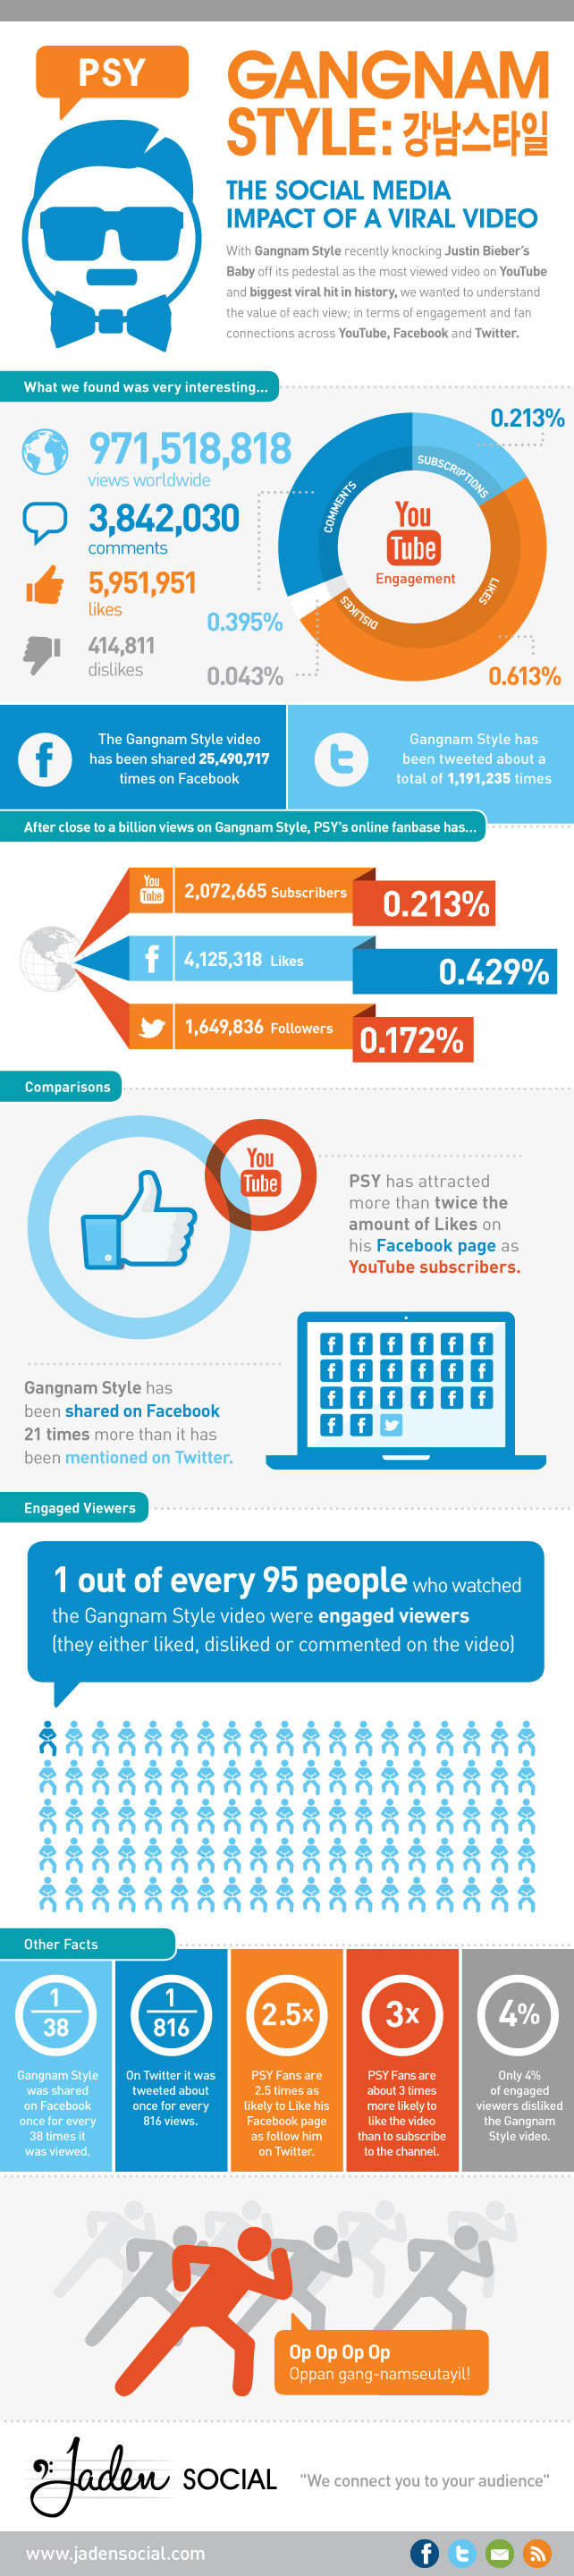 Gangnam Style: The Social Media Impact of a Viral Video